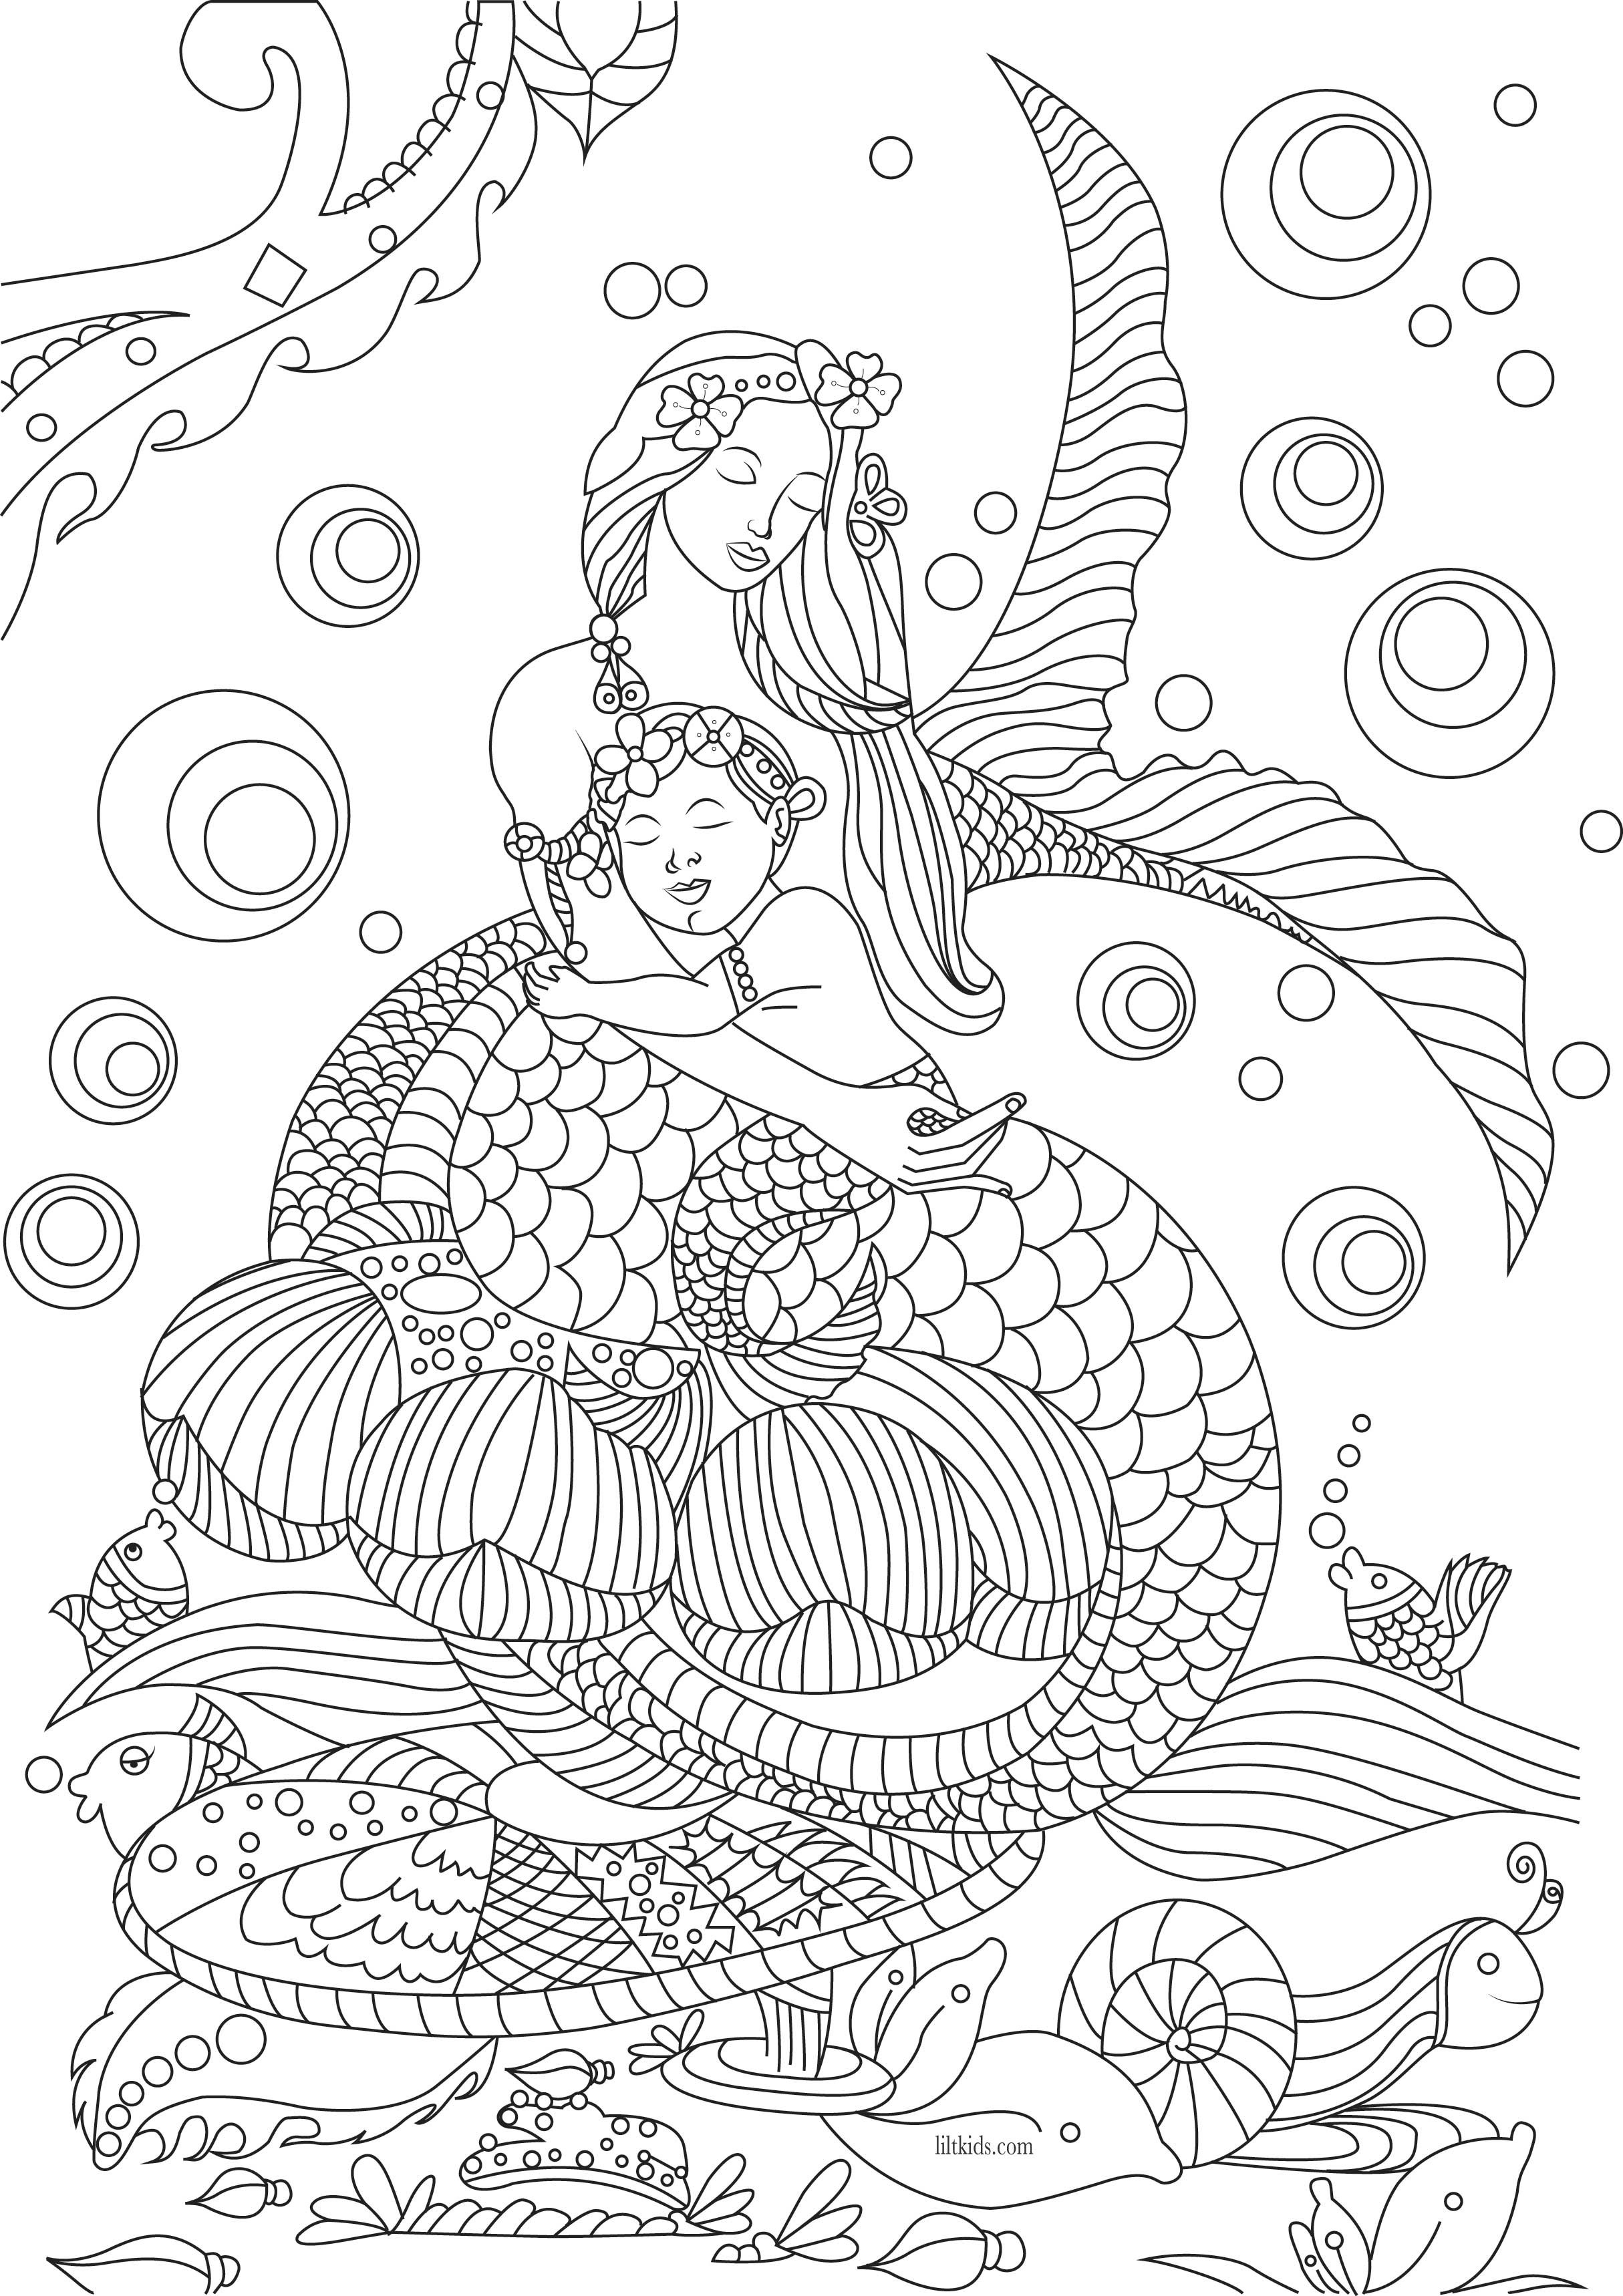 Free Mermaid Coloring Pages
 Free Beautiful Mermaid Adult Coloring Book Image From